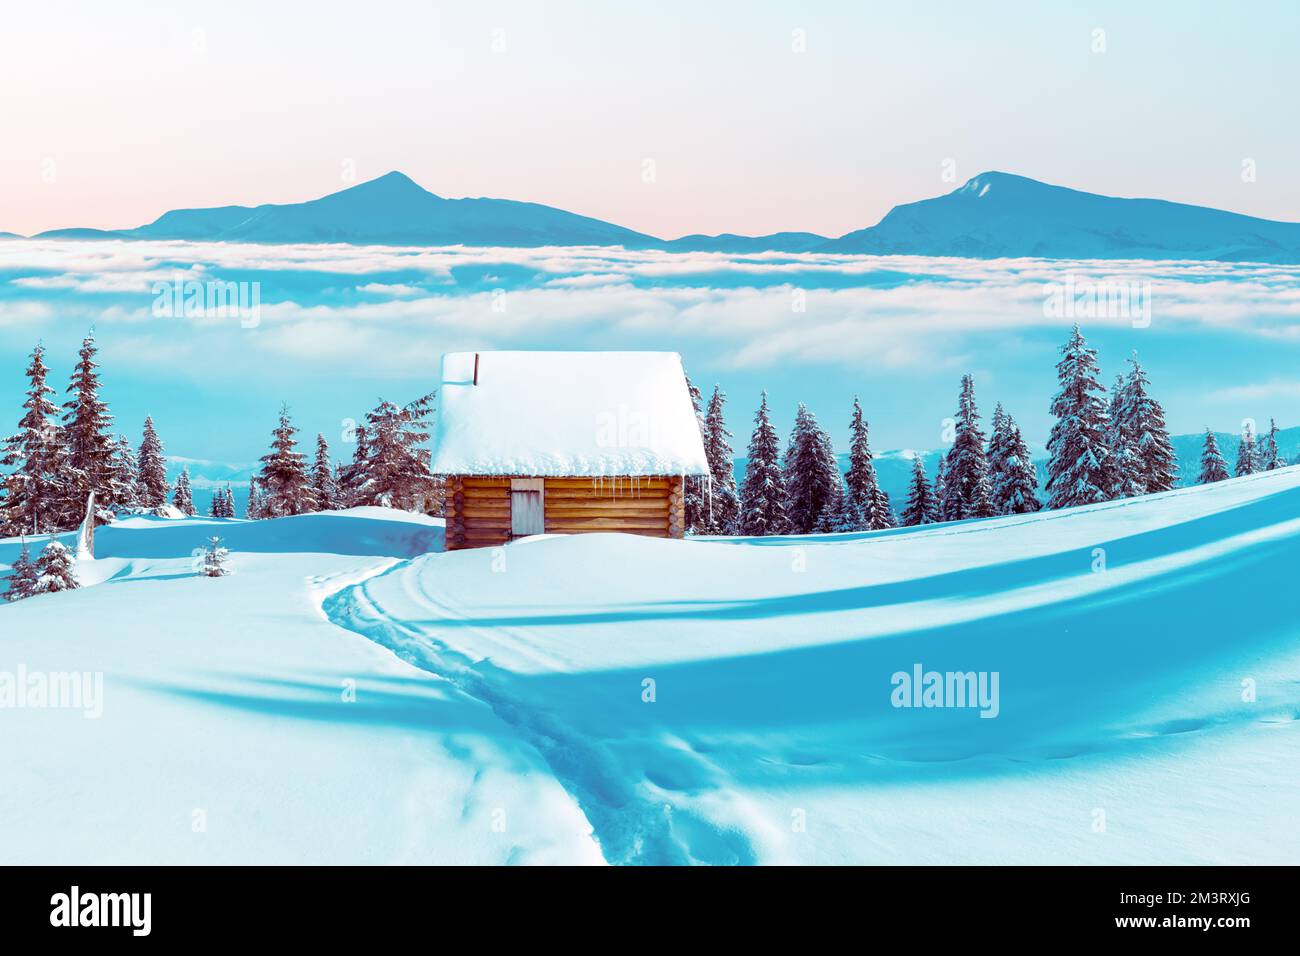 Fantastic winter landscape with wooden house and mountain peaks in mist in snowy mountains. Christmas holiday concept. Carpathians mountain, Ukraine, Europe Stock Photo